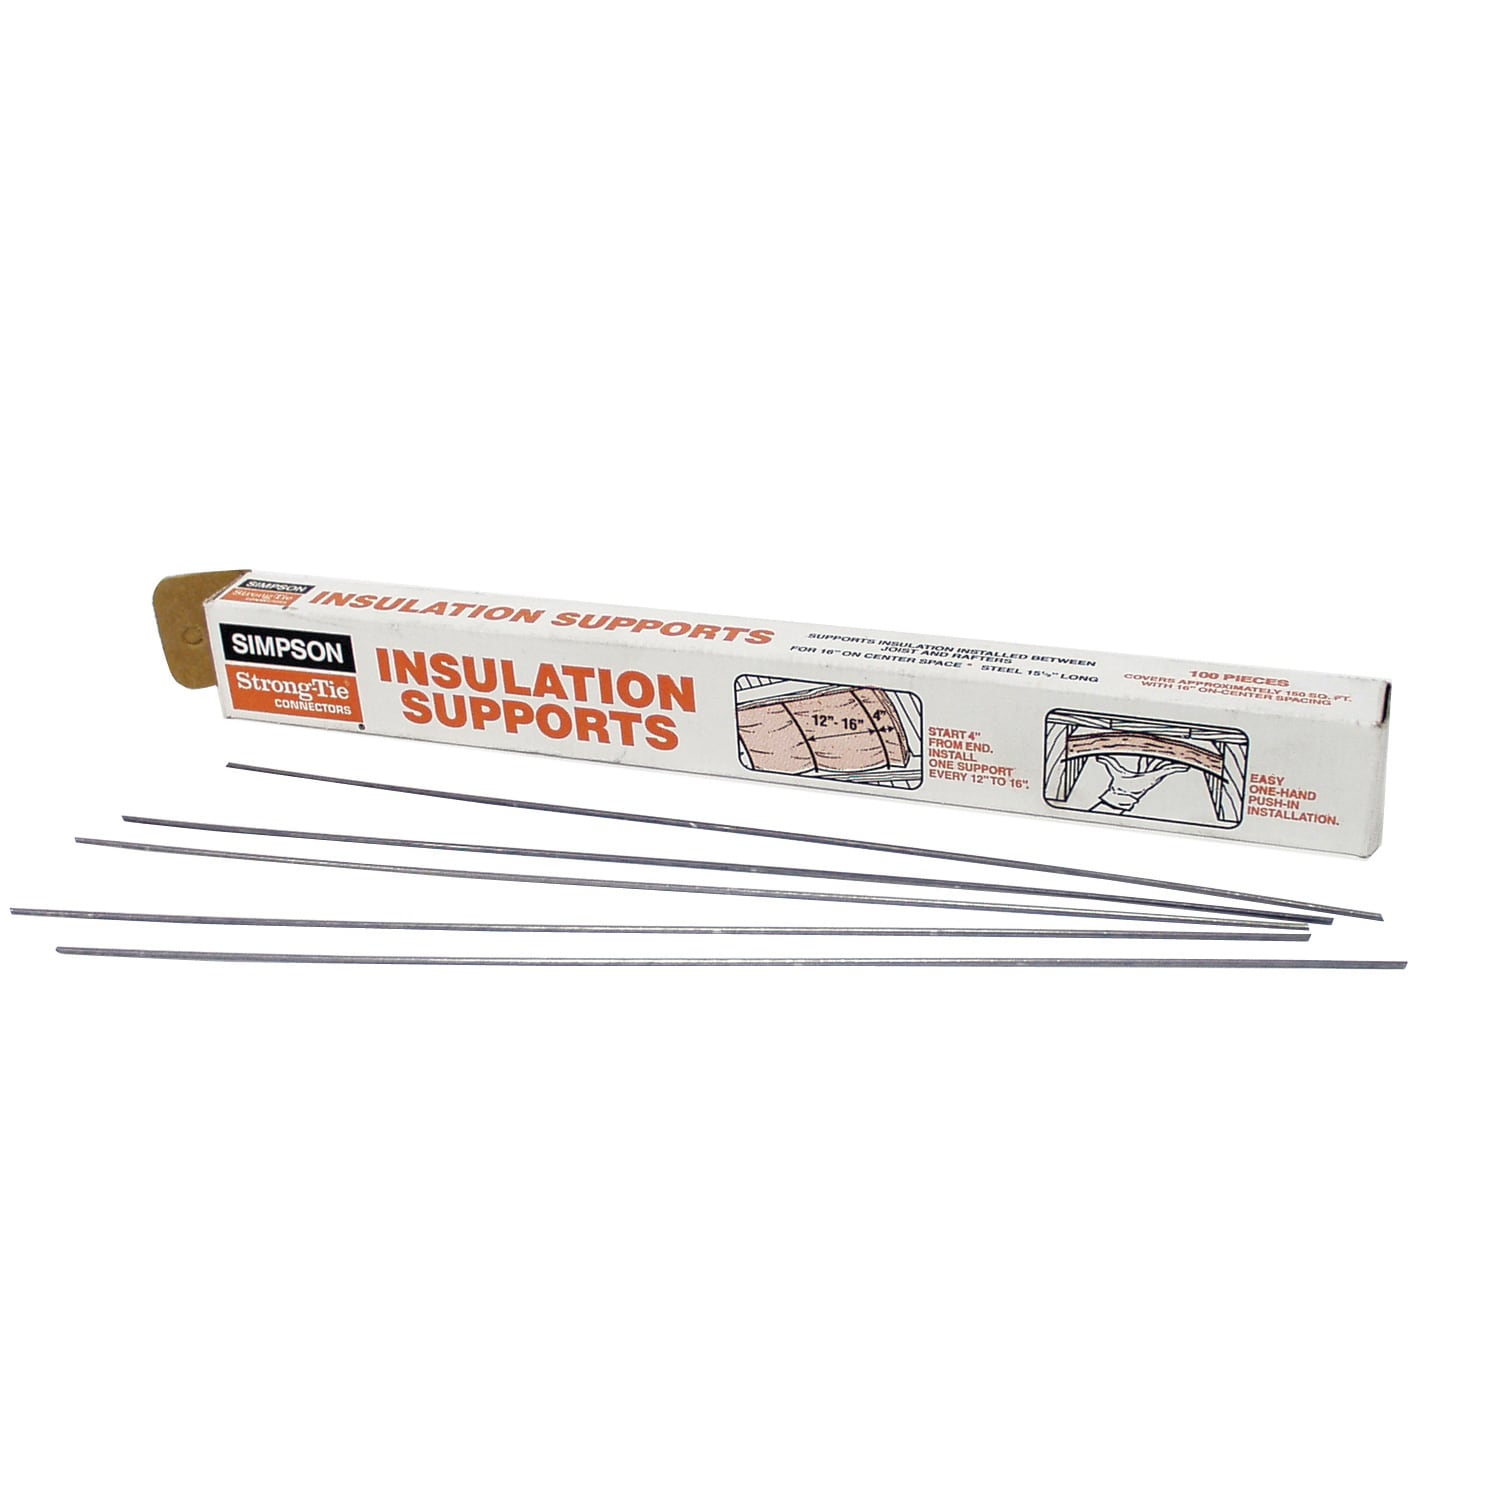 Insulation Support, 16, 14-gauge Wire, 100 PK., Simpson Strong, IS16-R100